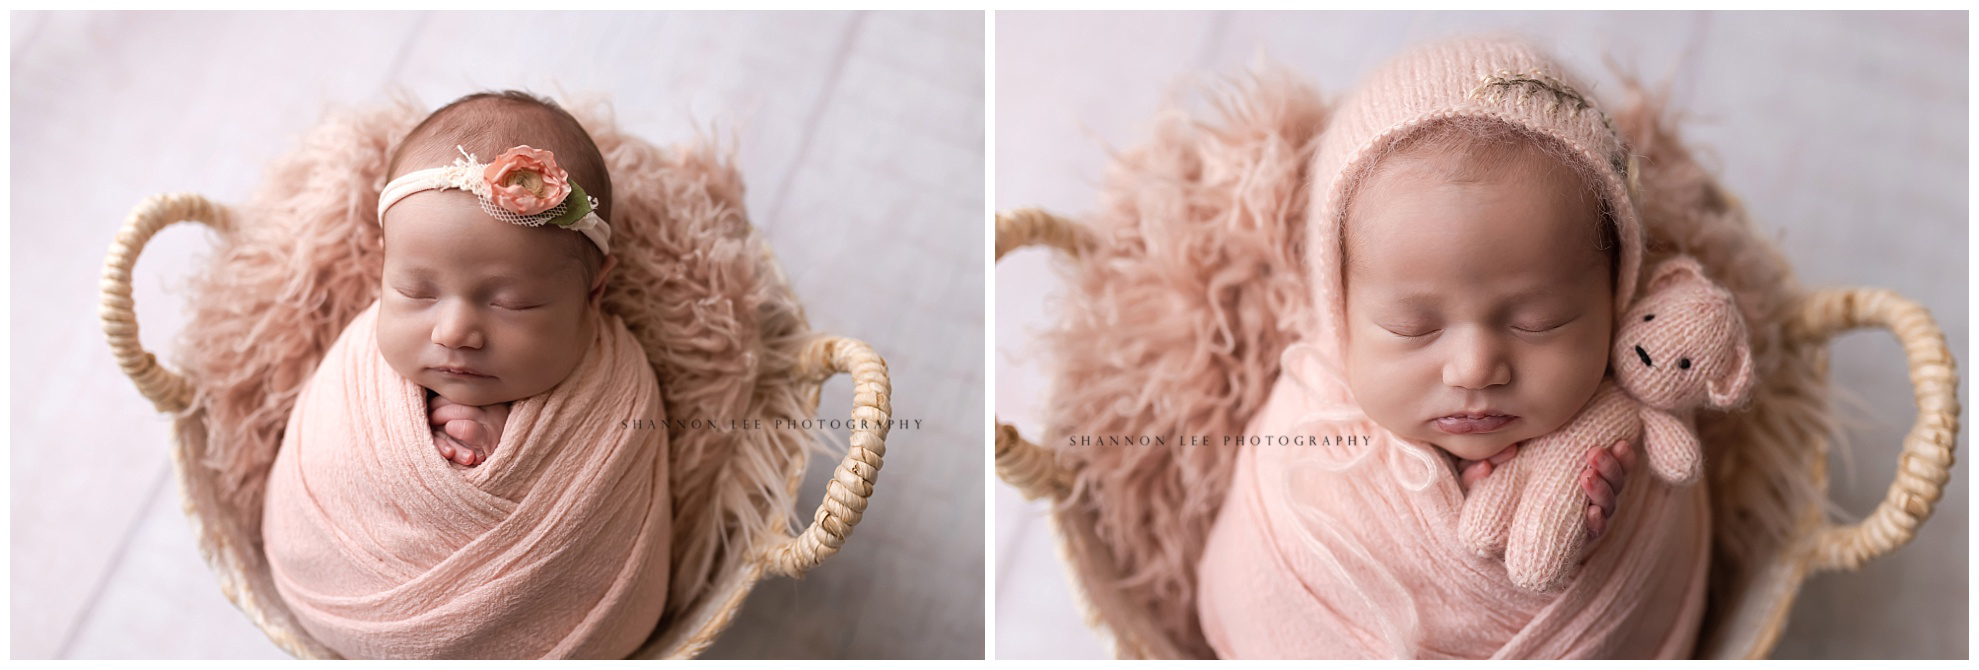 Newborn baby girl in a basket with ballet pink fabrics